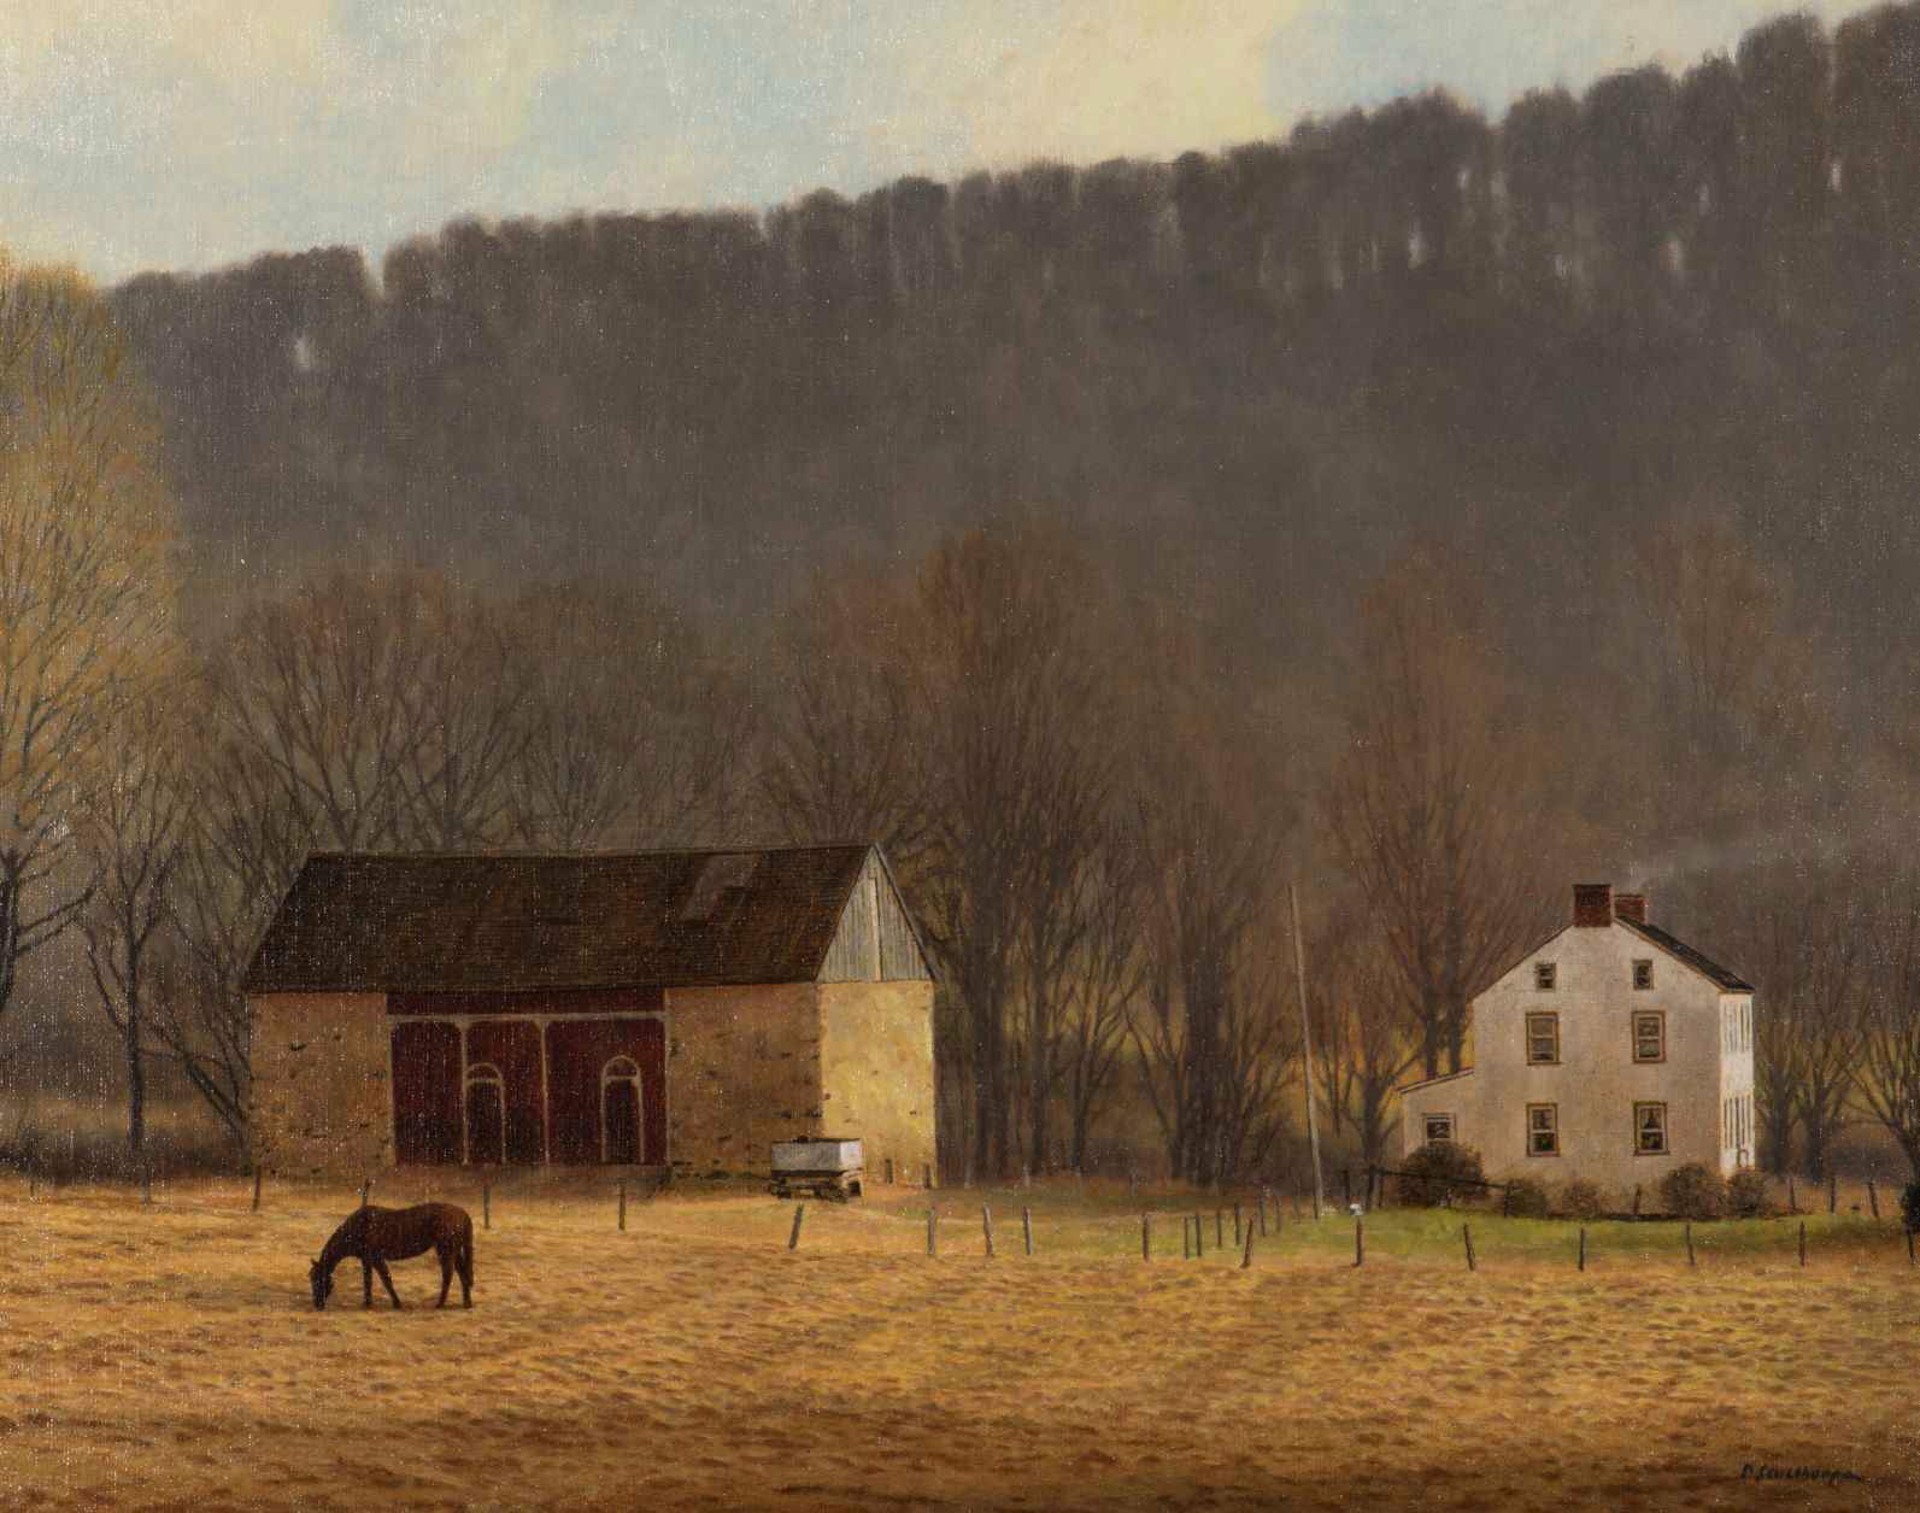 Rappahannock Country Virginia by Peter Sculthorpe